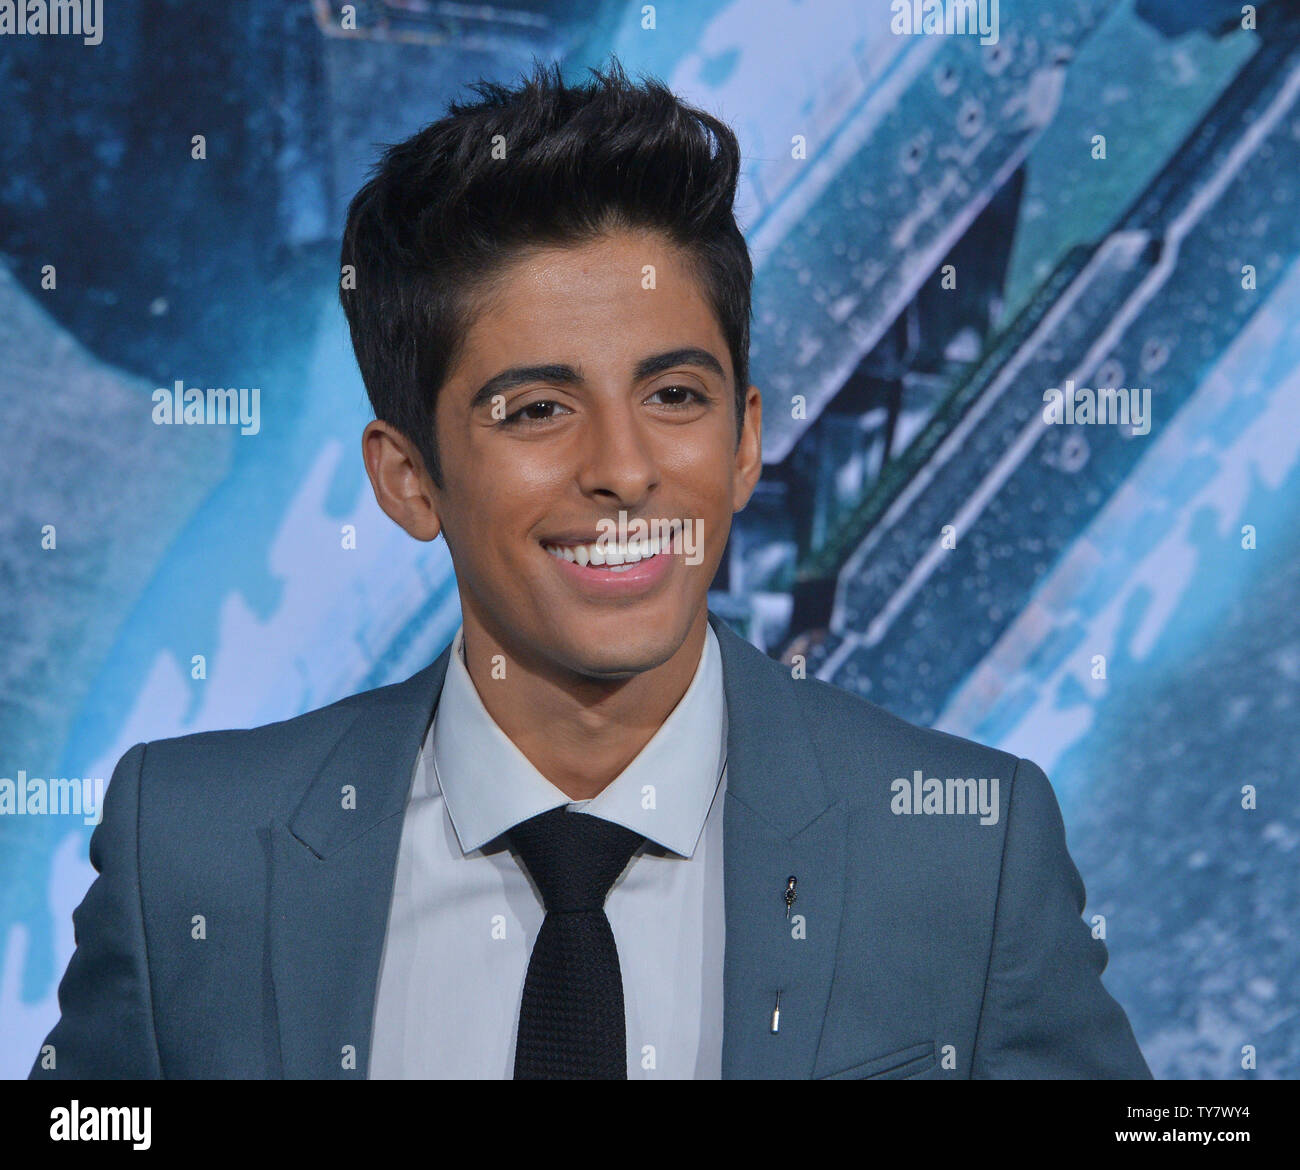 Cast member Karan Brar attends the premiere of the sci-fi motion picture  "Pacific Rim Uprising" at the TCL Chinese Theatre in the Hollywood section  of Los Angeles on March 21, 2018. Storyline: